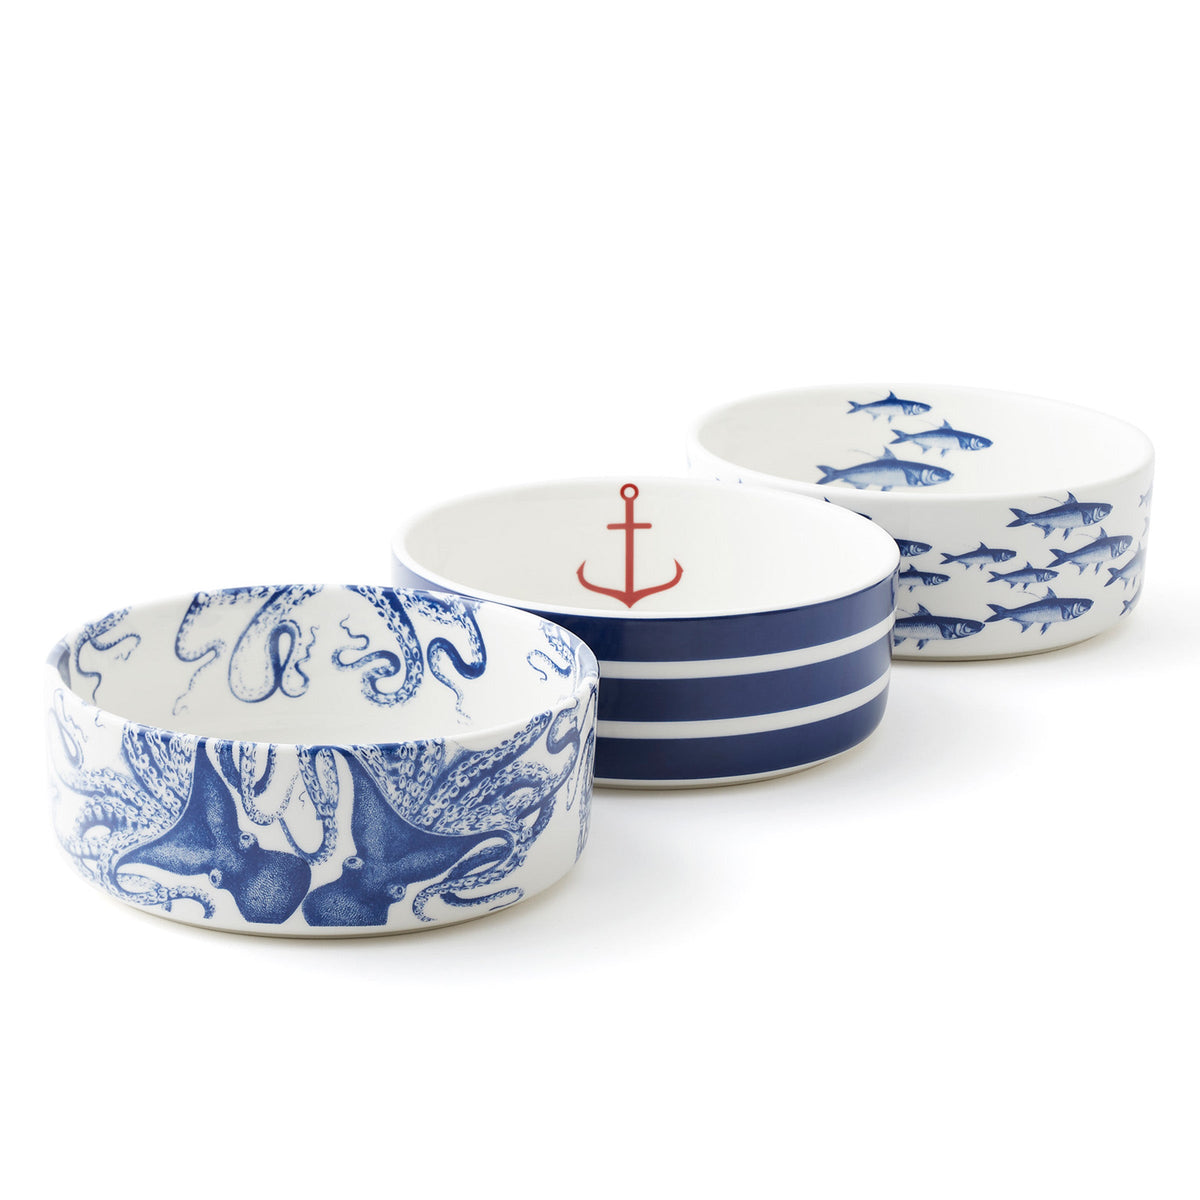 Three Lucy Large Pet Bowls with blue and white octopus and anchor designs. (Brand Name: Caskata)